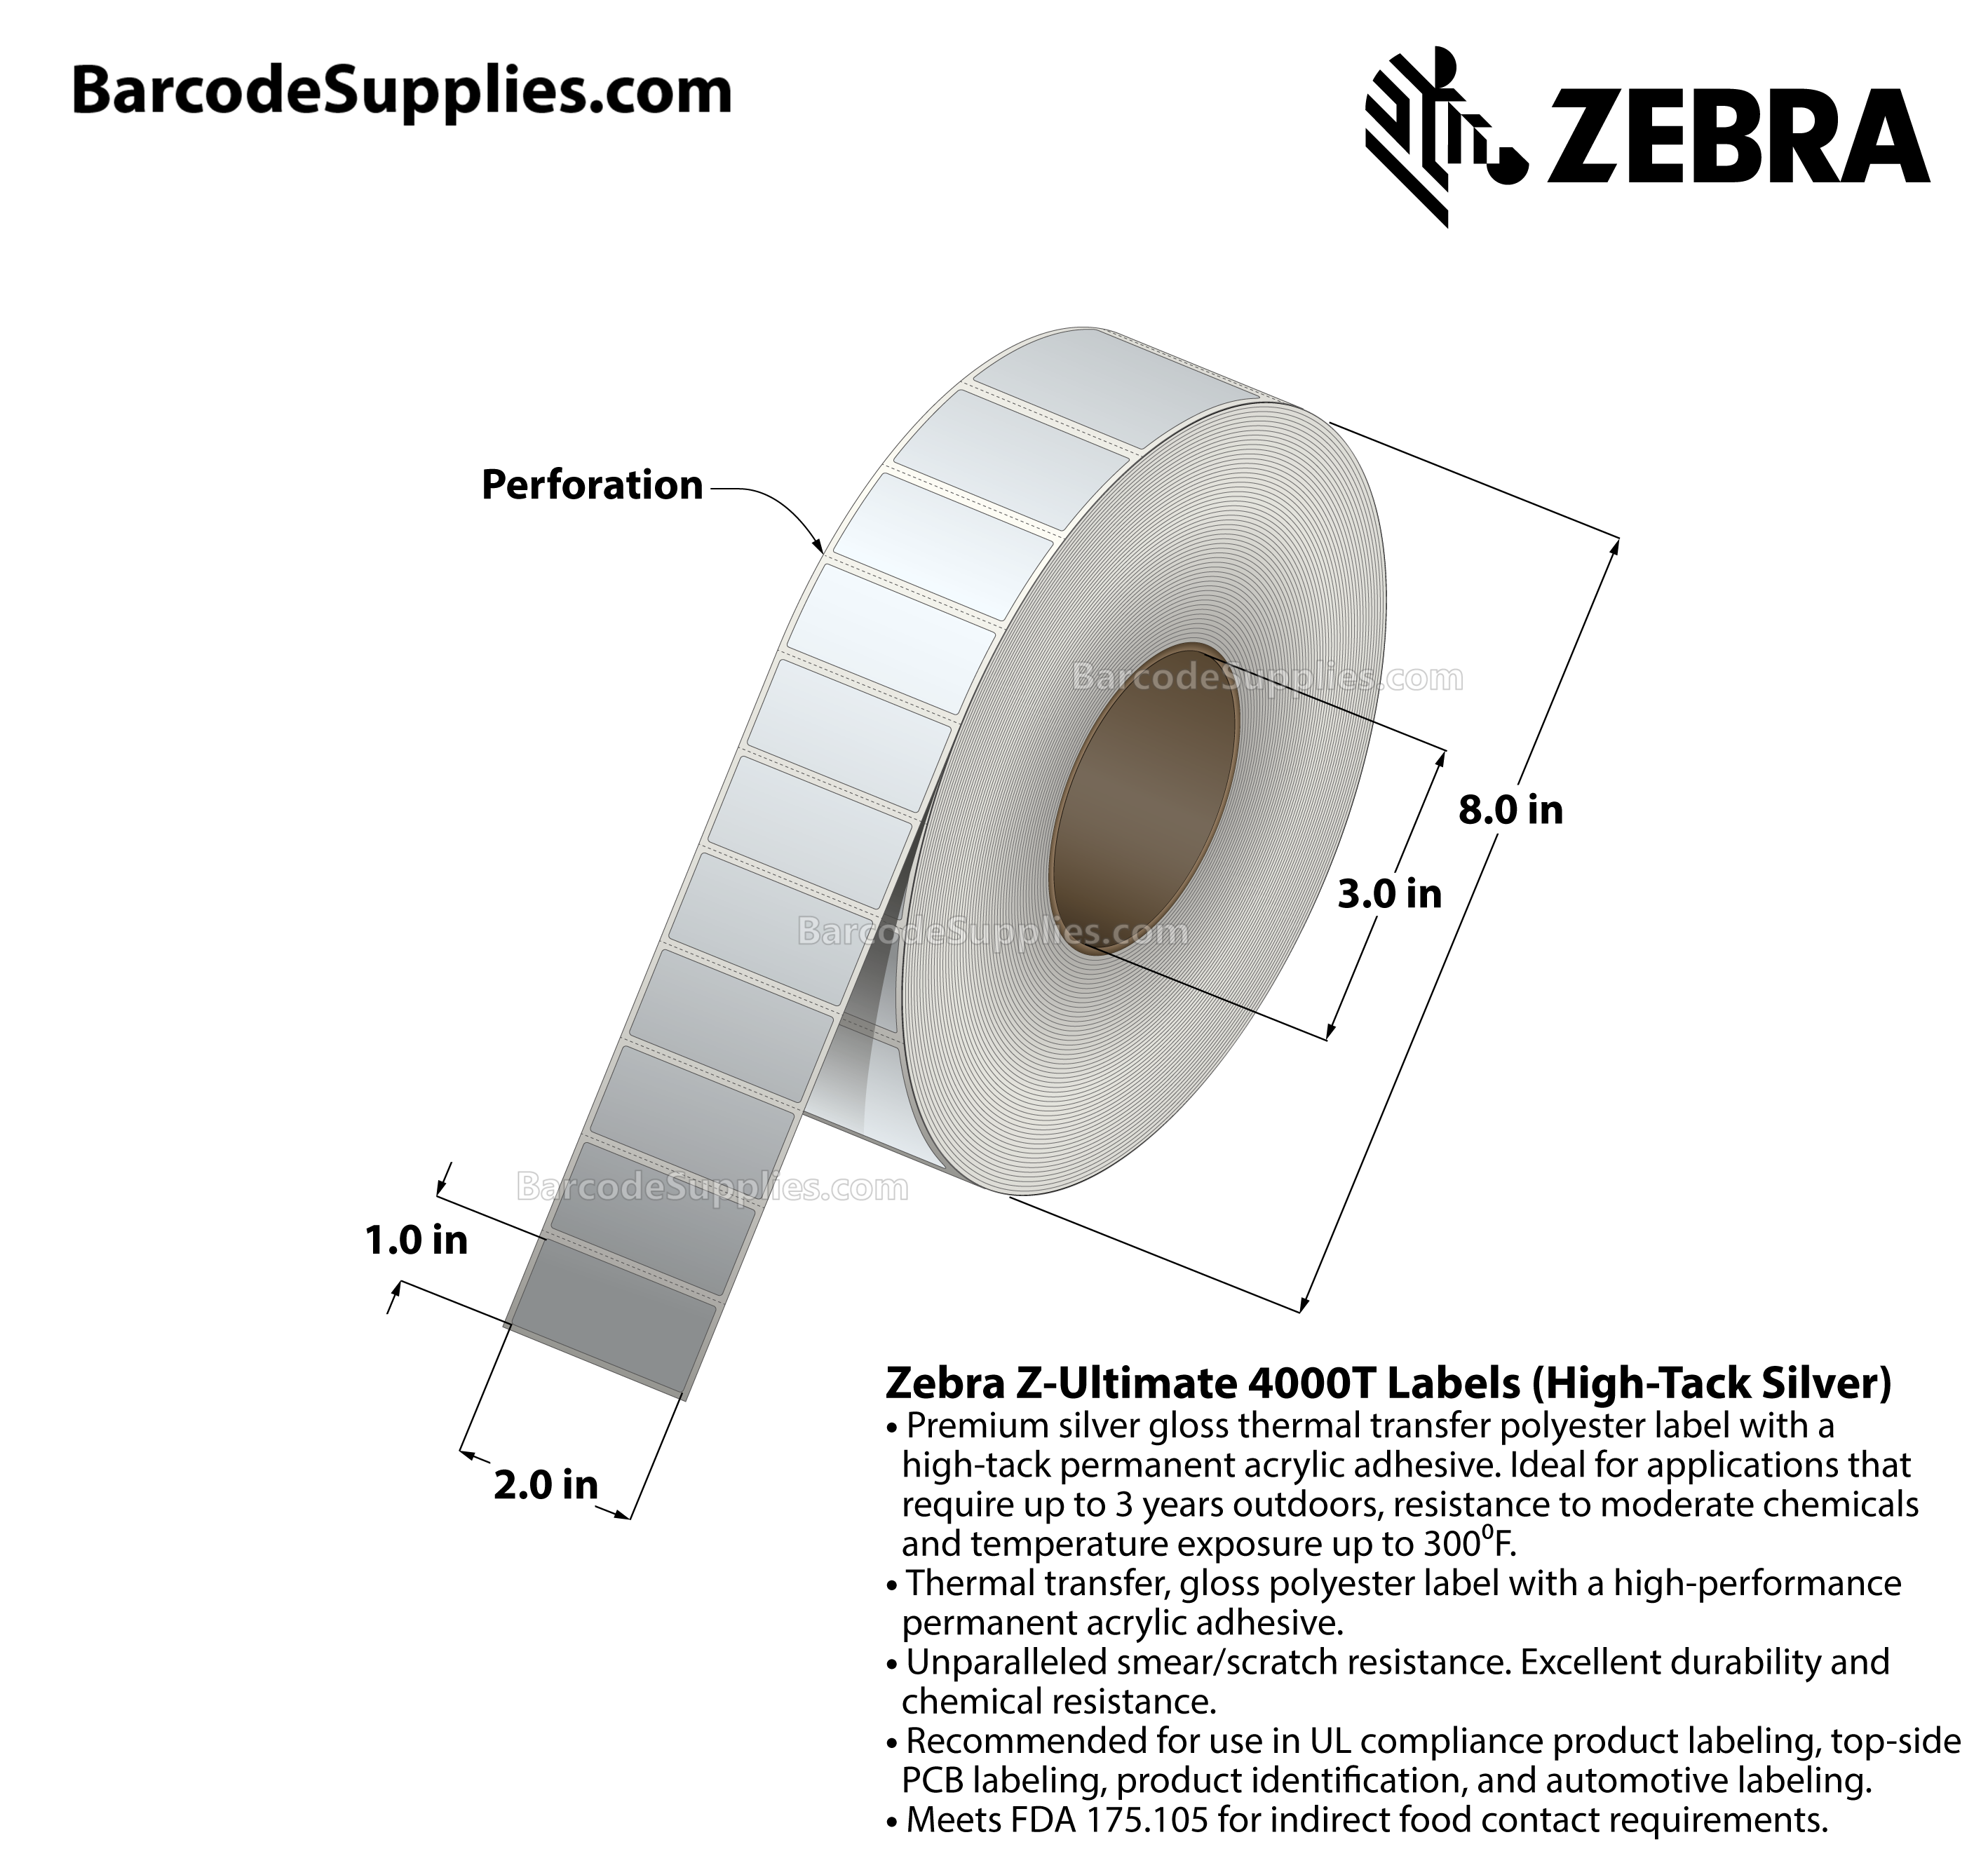 2 x 1 Thermal Transfer Silver Z-Ultimate 4000T High-Tack Silver Labels With High-tack Adhesive - Perforated - 3000 Labels Per Roll - Carton Of 1 Rolls - 3000 Labels Total - MPN: 10023352